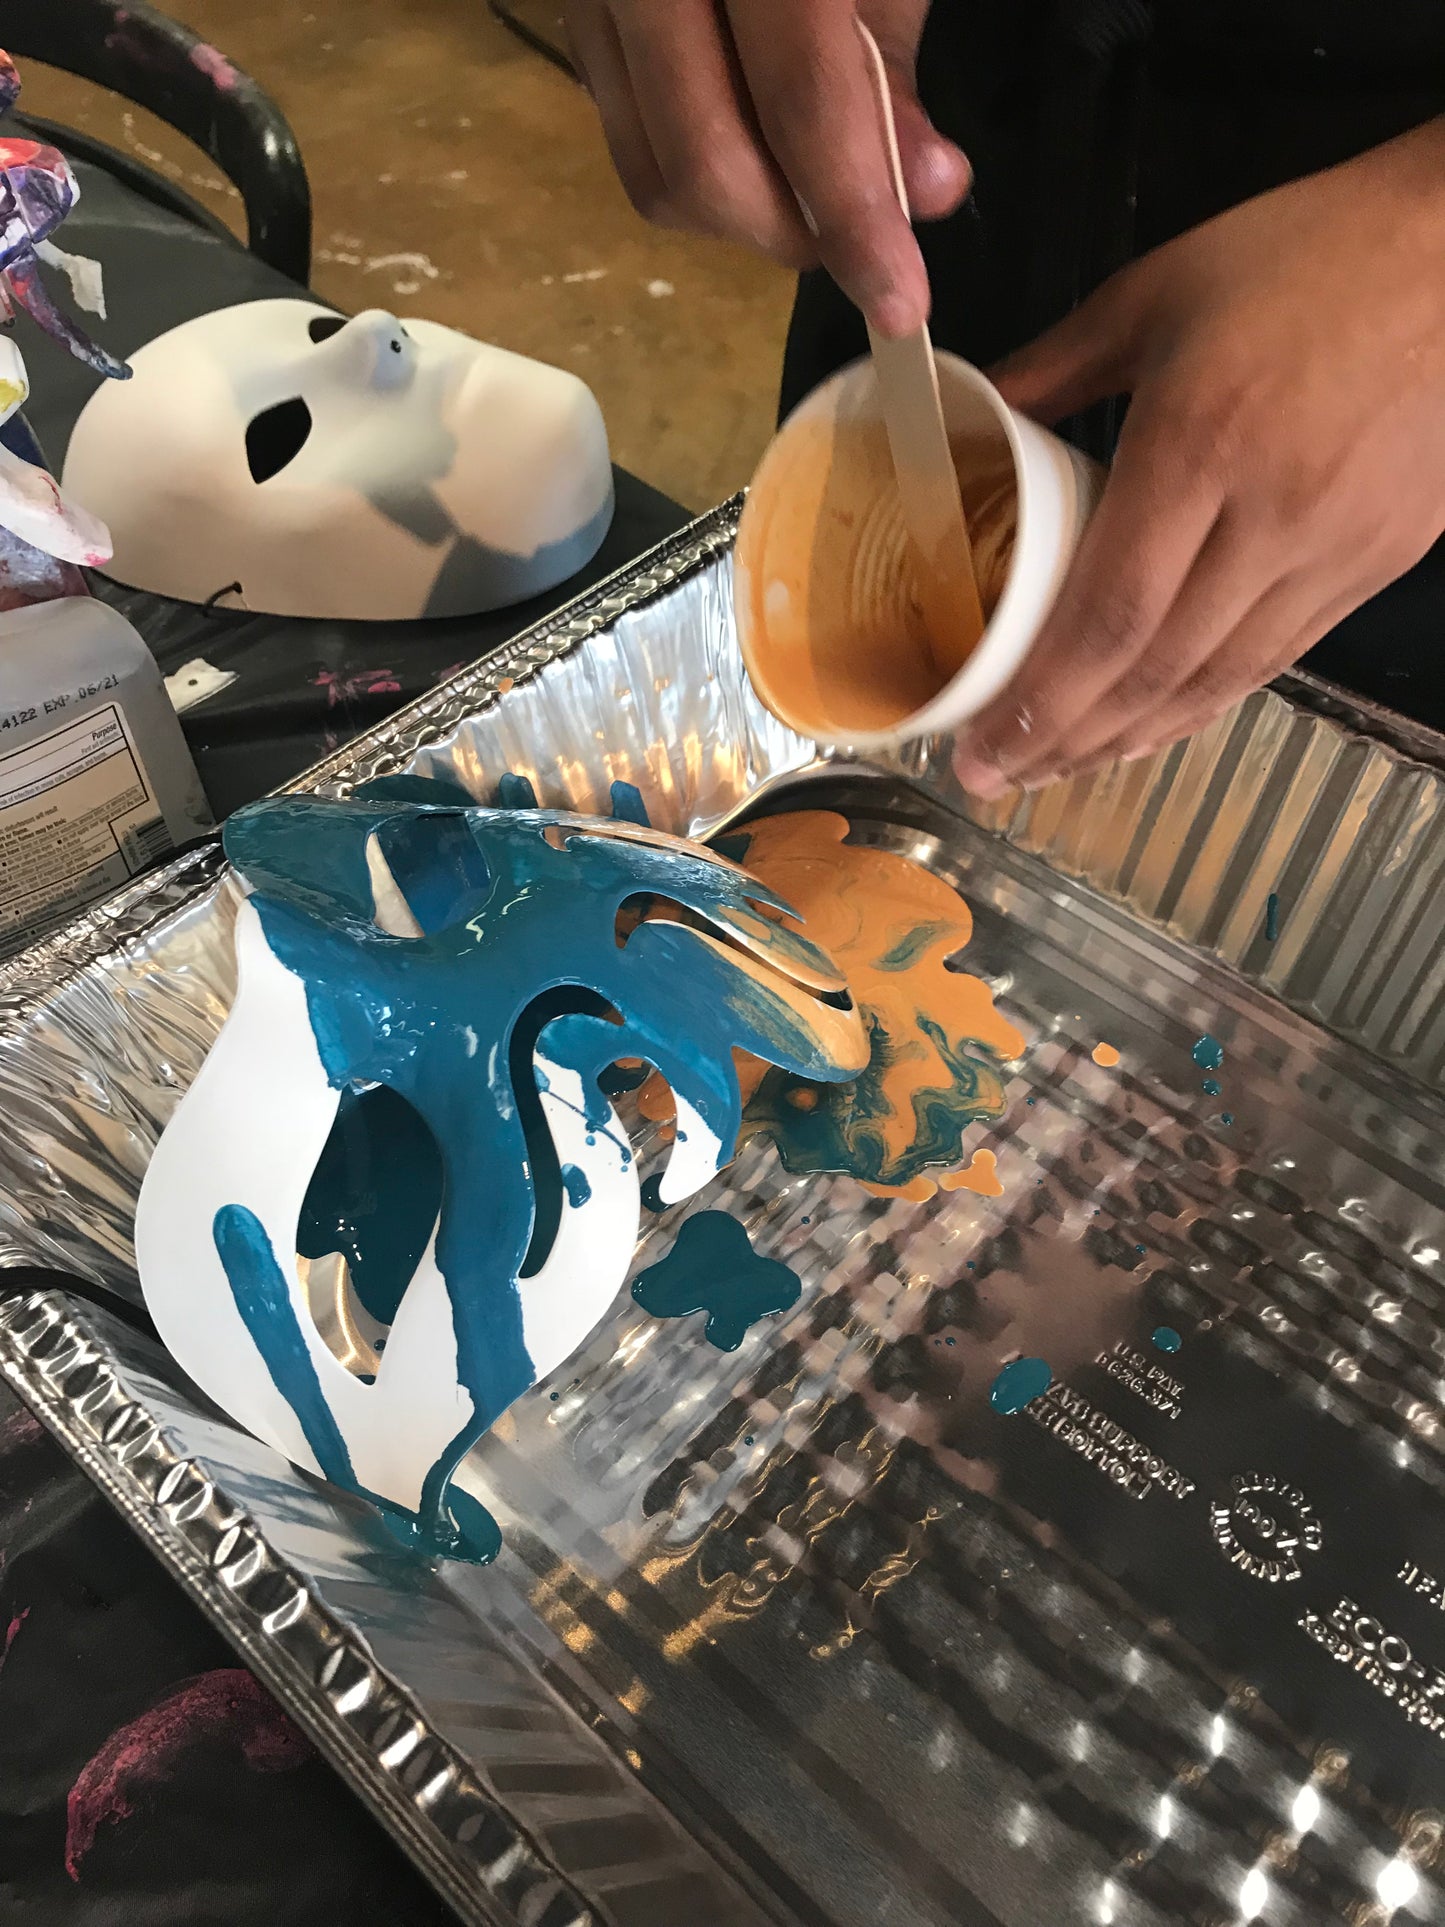 Sat, Oct 28th, 9-11a “Acrylic Poured” Houston Public Family Painting Class